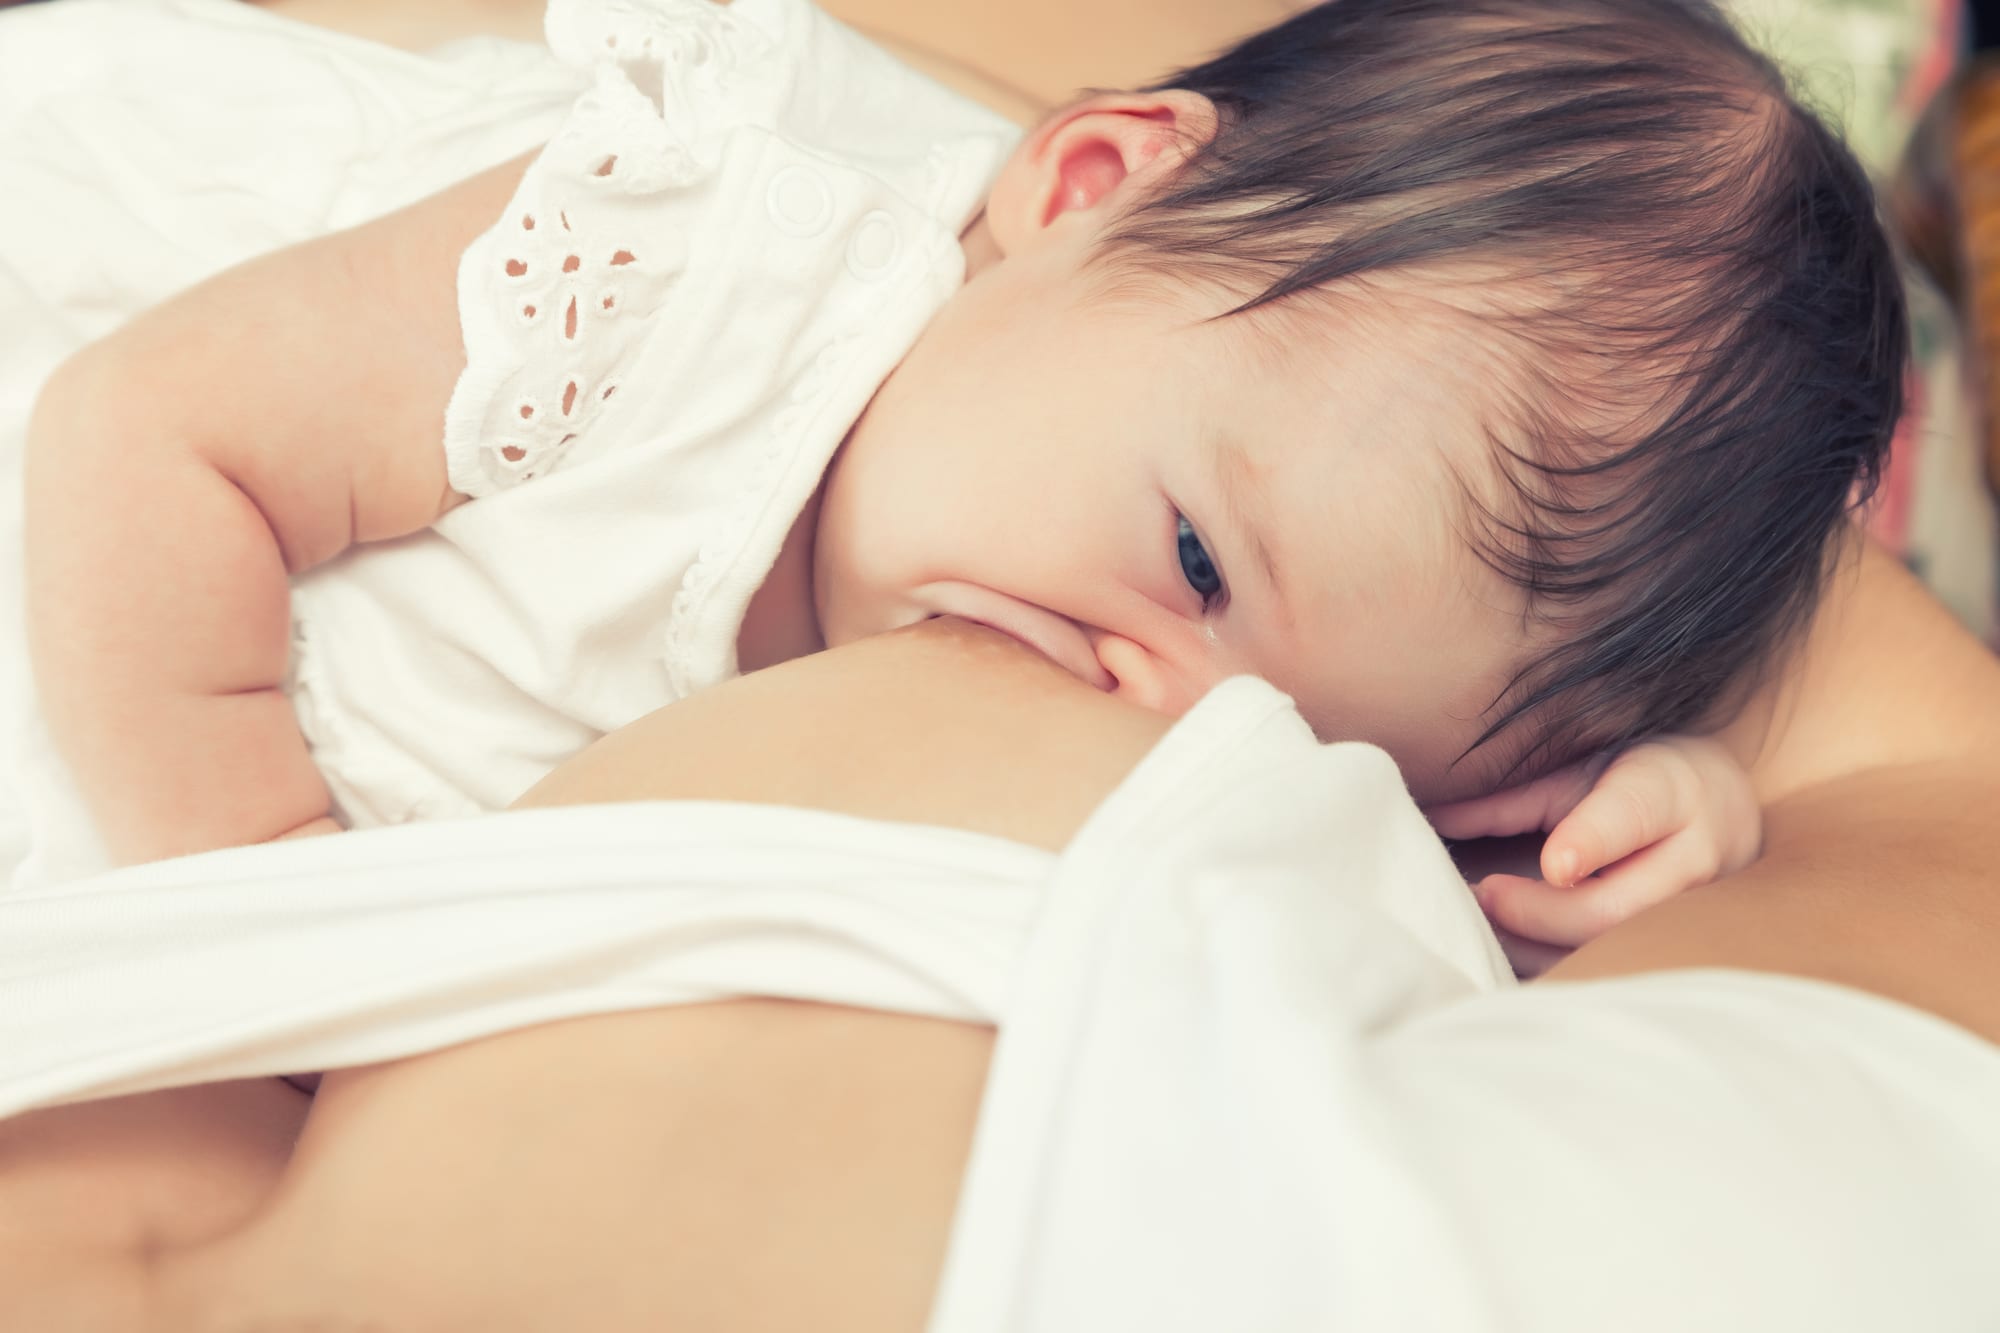 How to prepare for breastfeeding before your baby comes. 